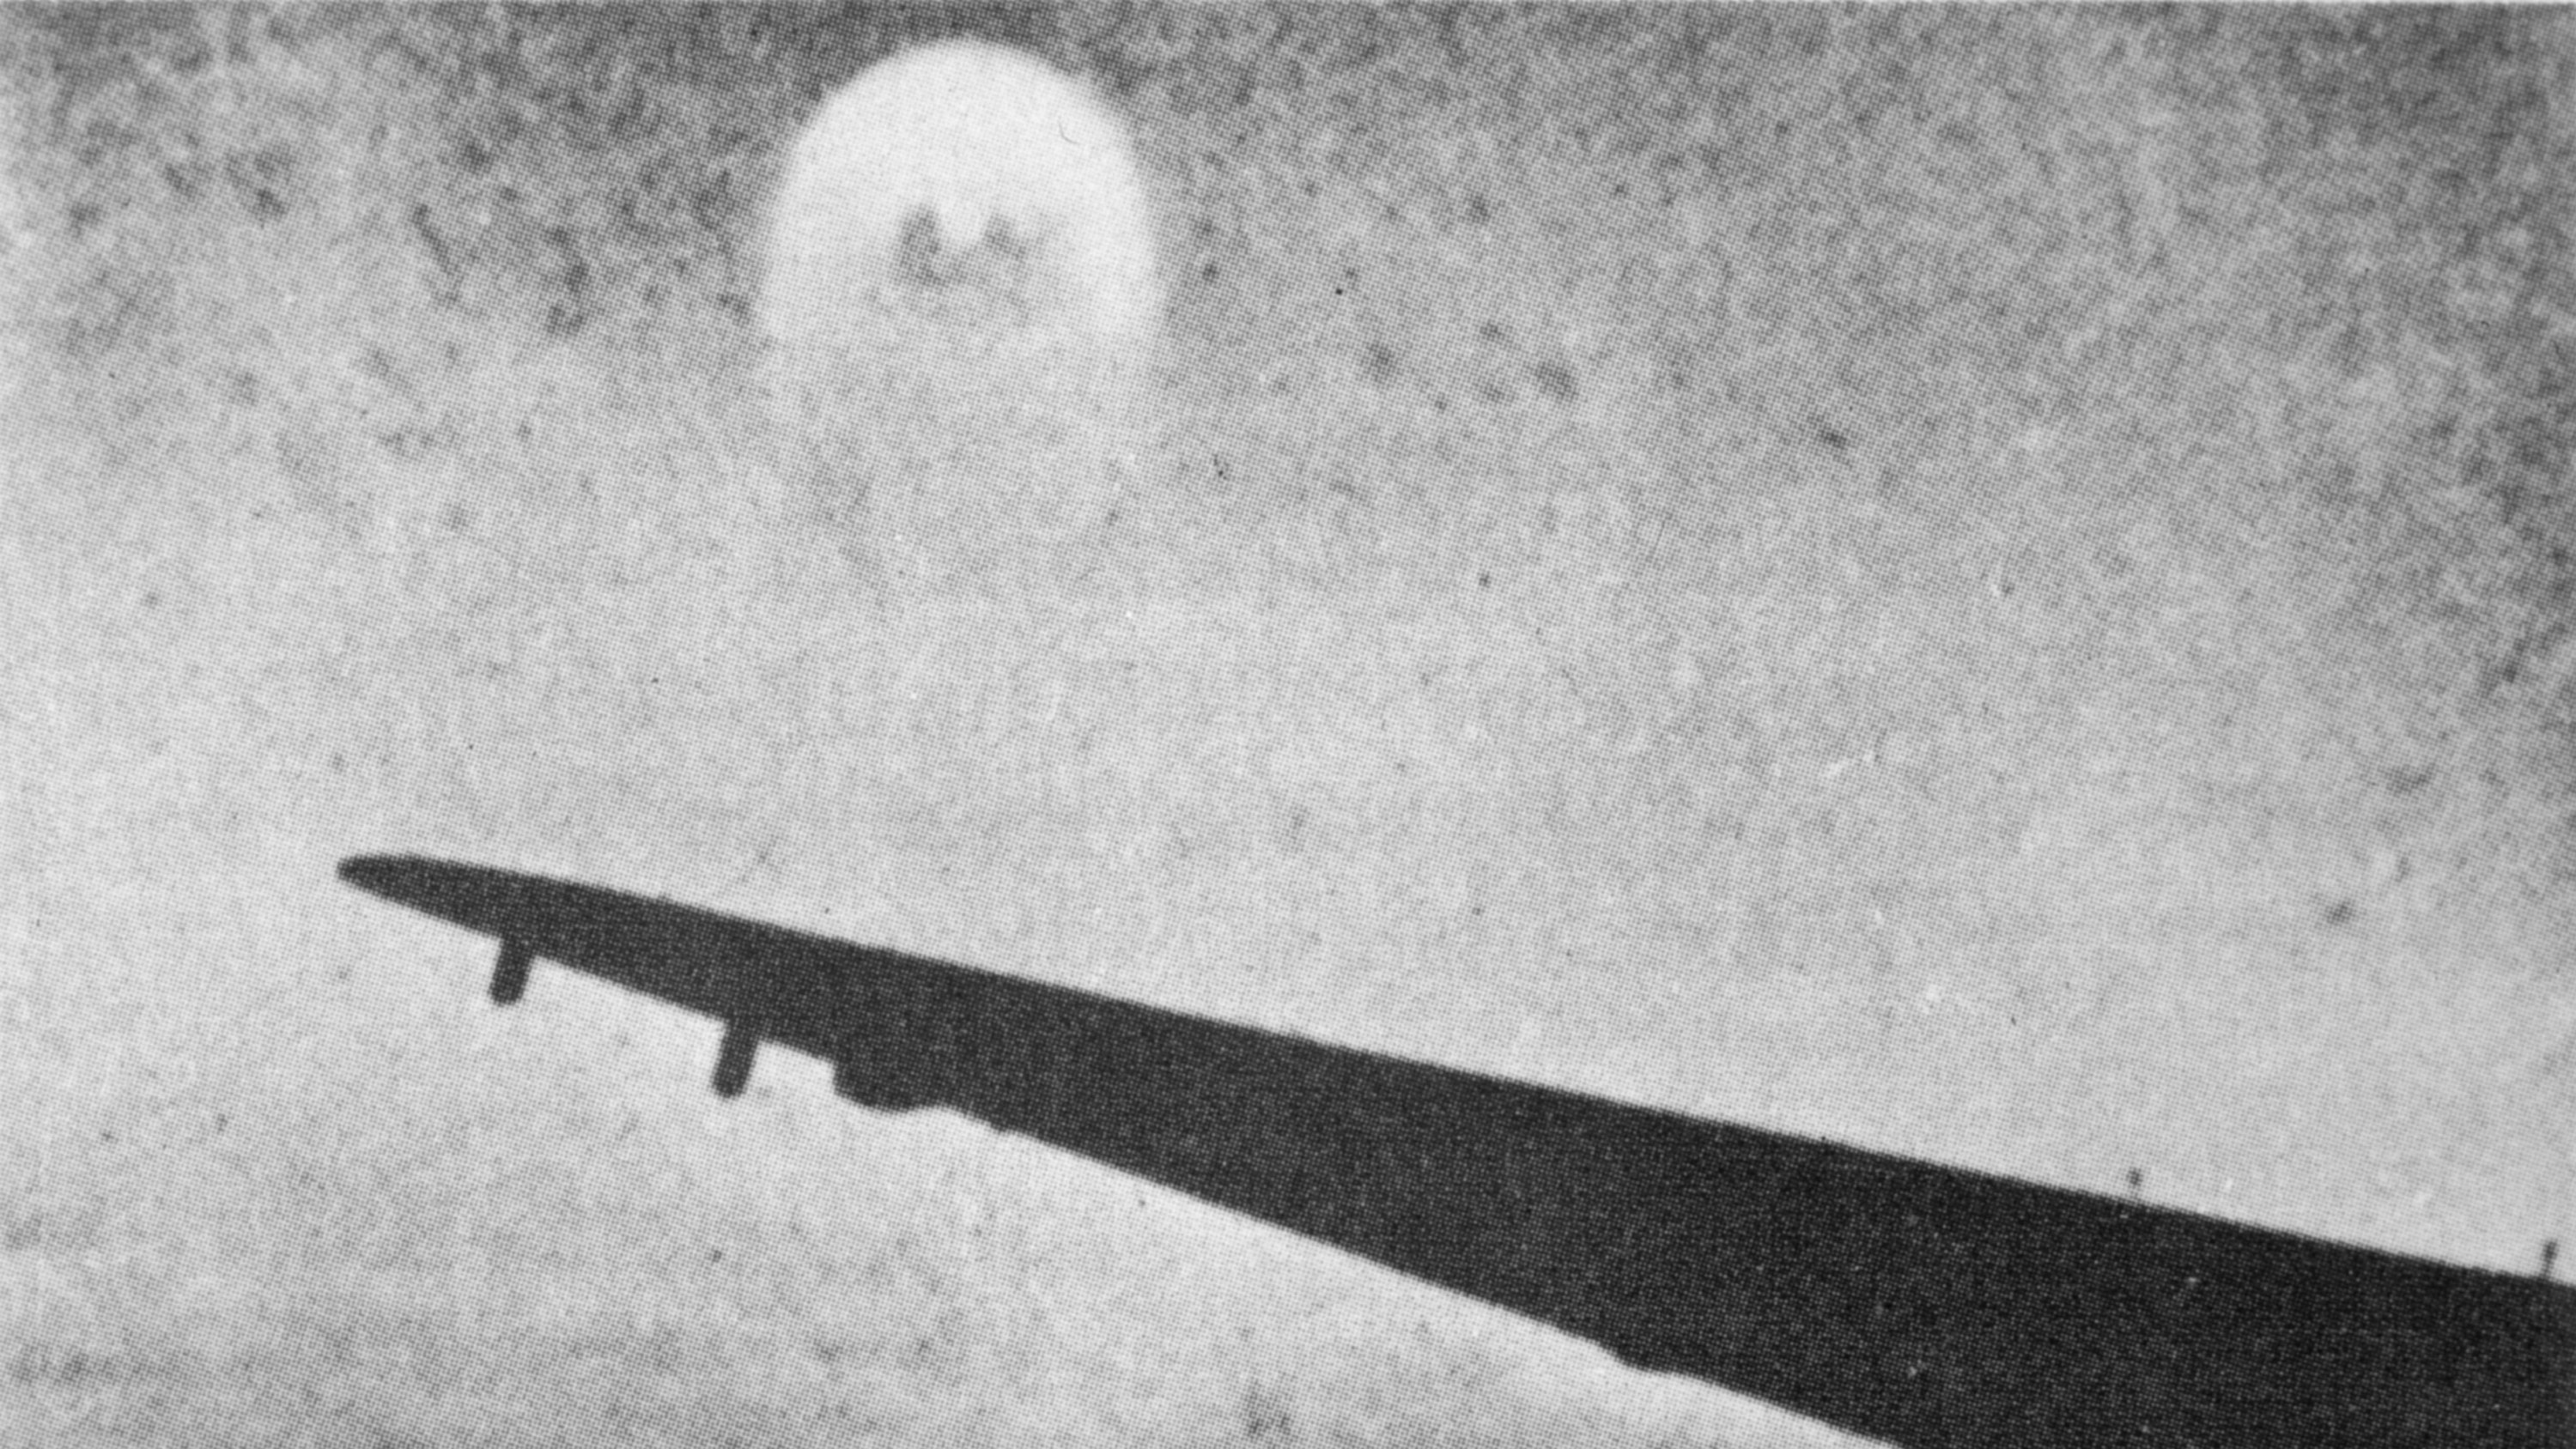 Read: Unexplained UFOs Seen by WWII Airman